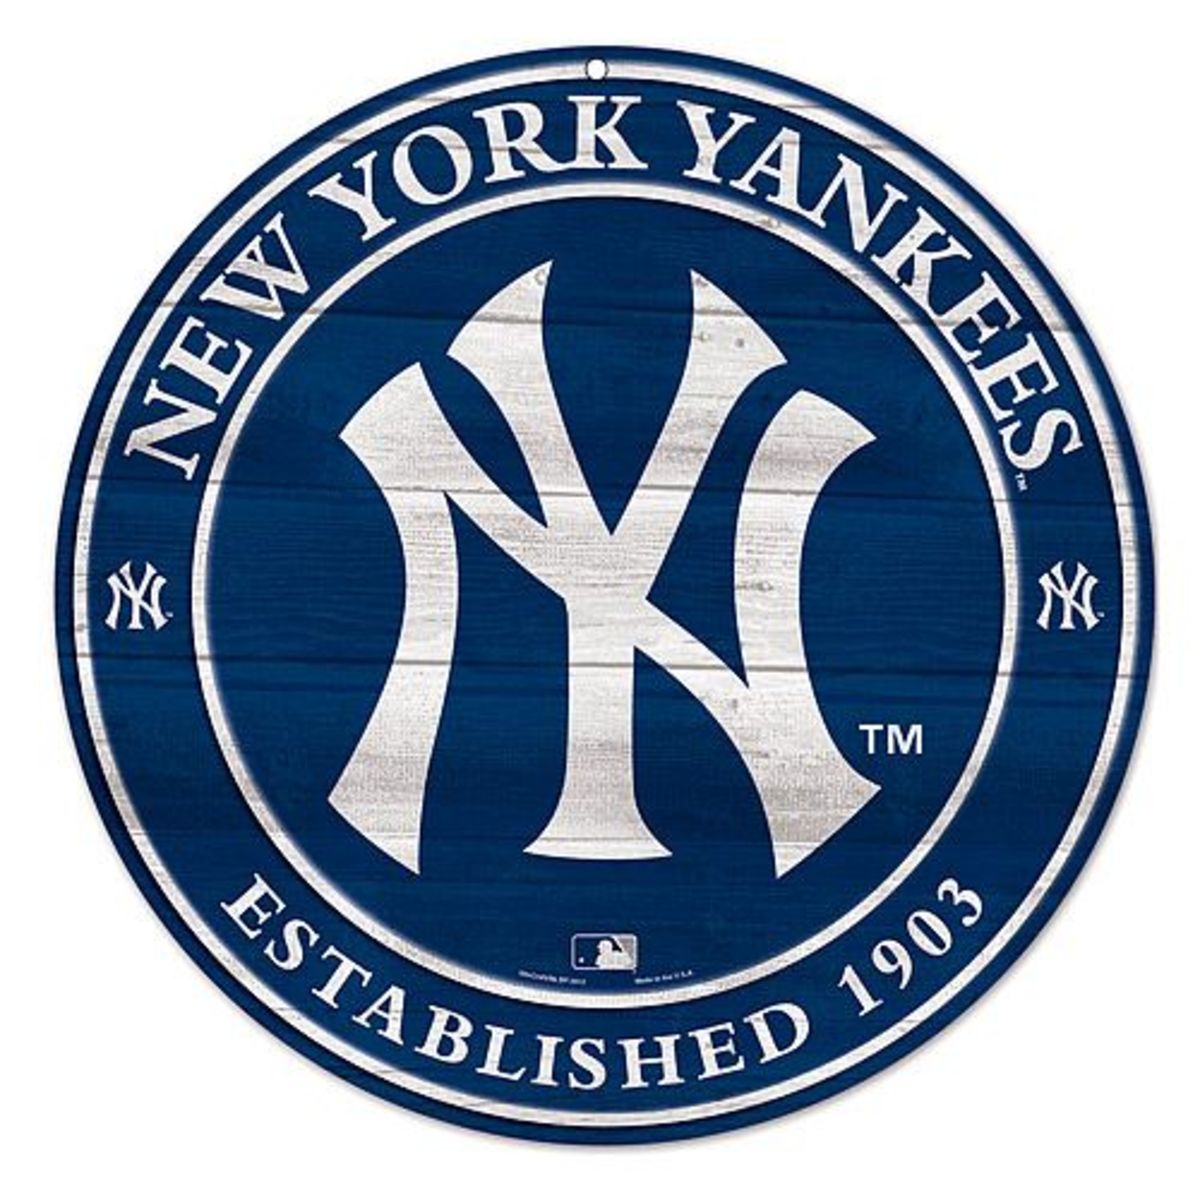 In 1978, the New York Yankees were the World Series champions.